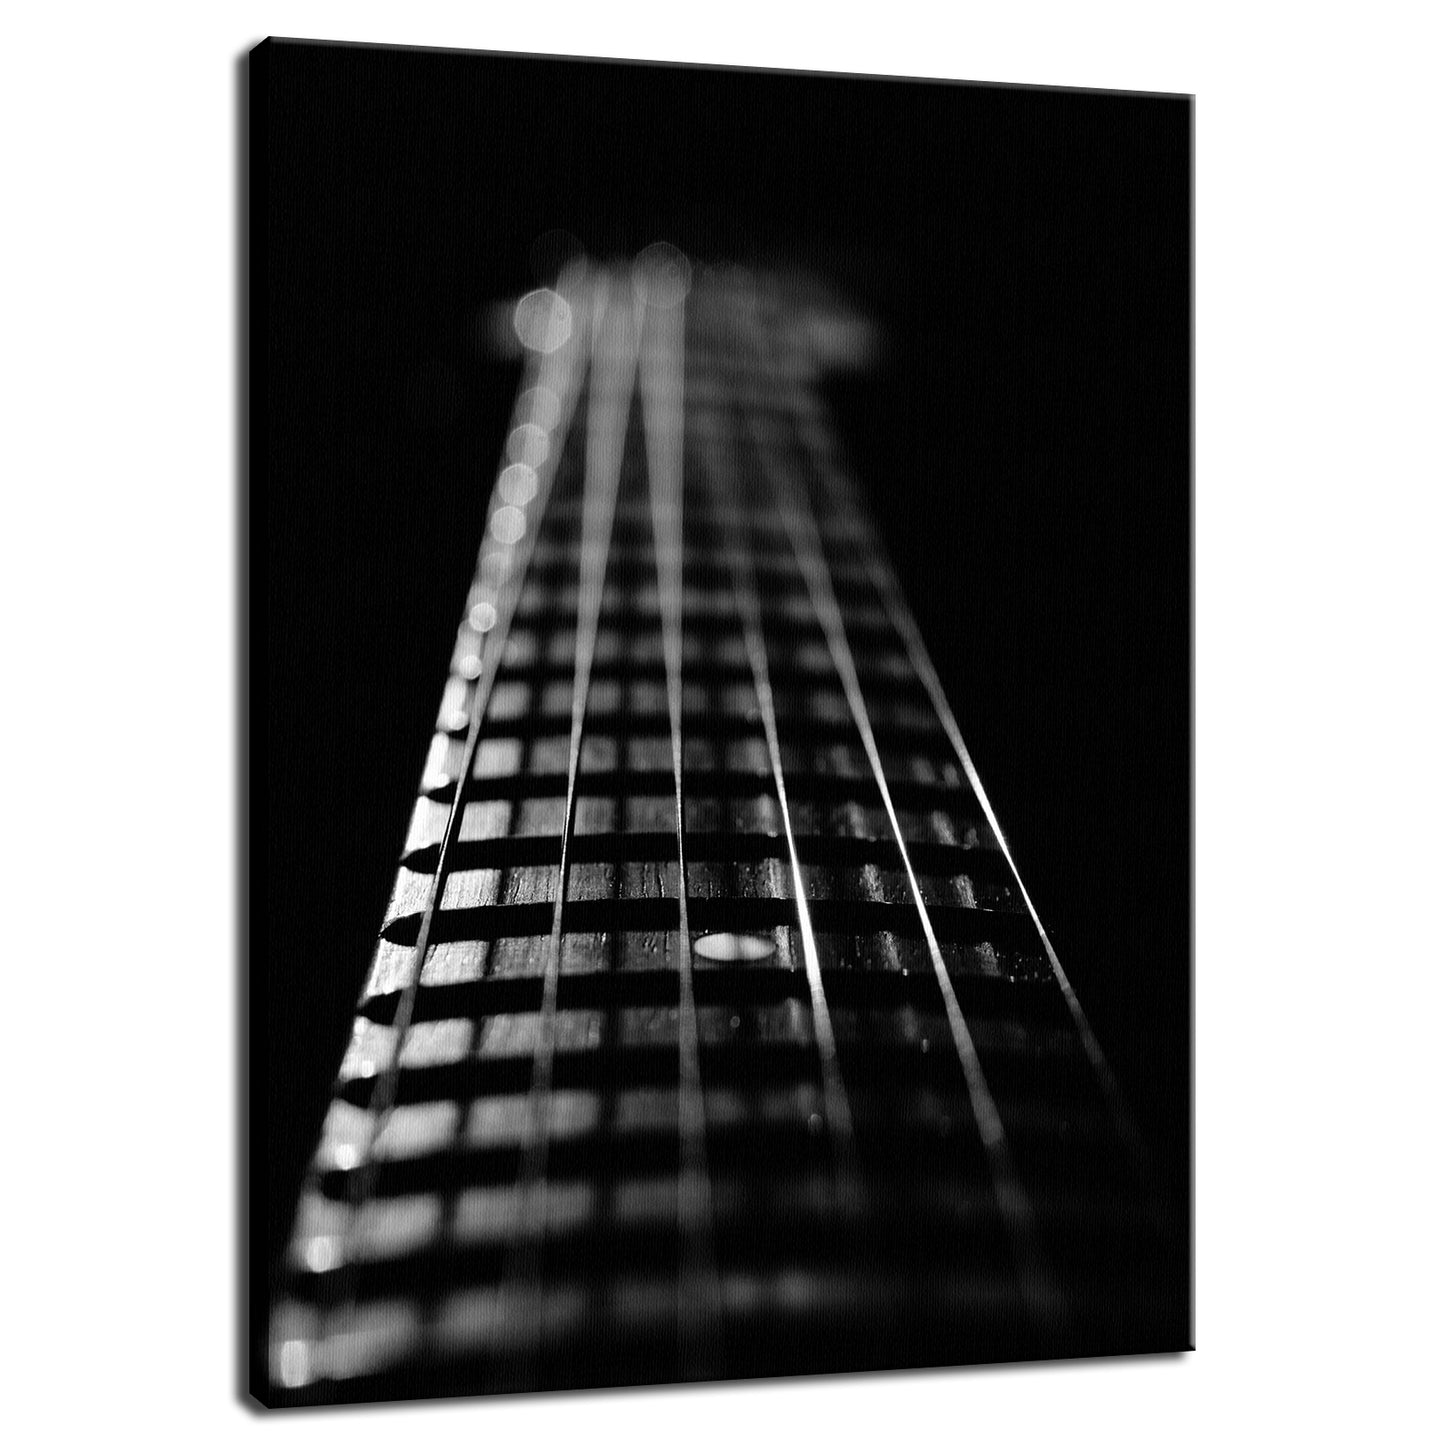 Frets and Cords Black and White Abstract Photo Fine Art Canvas & Unframed Wall Art Prints  - PIPAFINEART